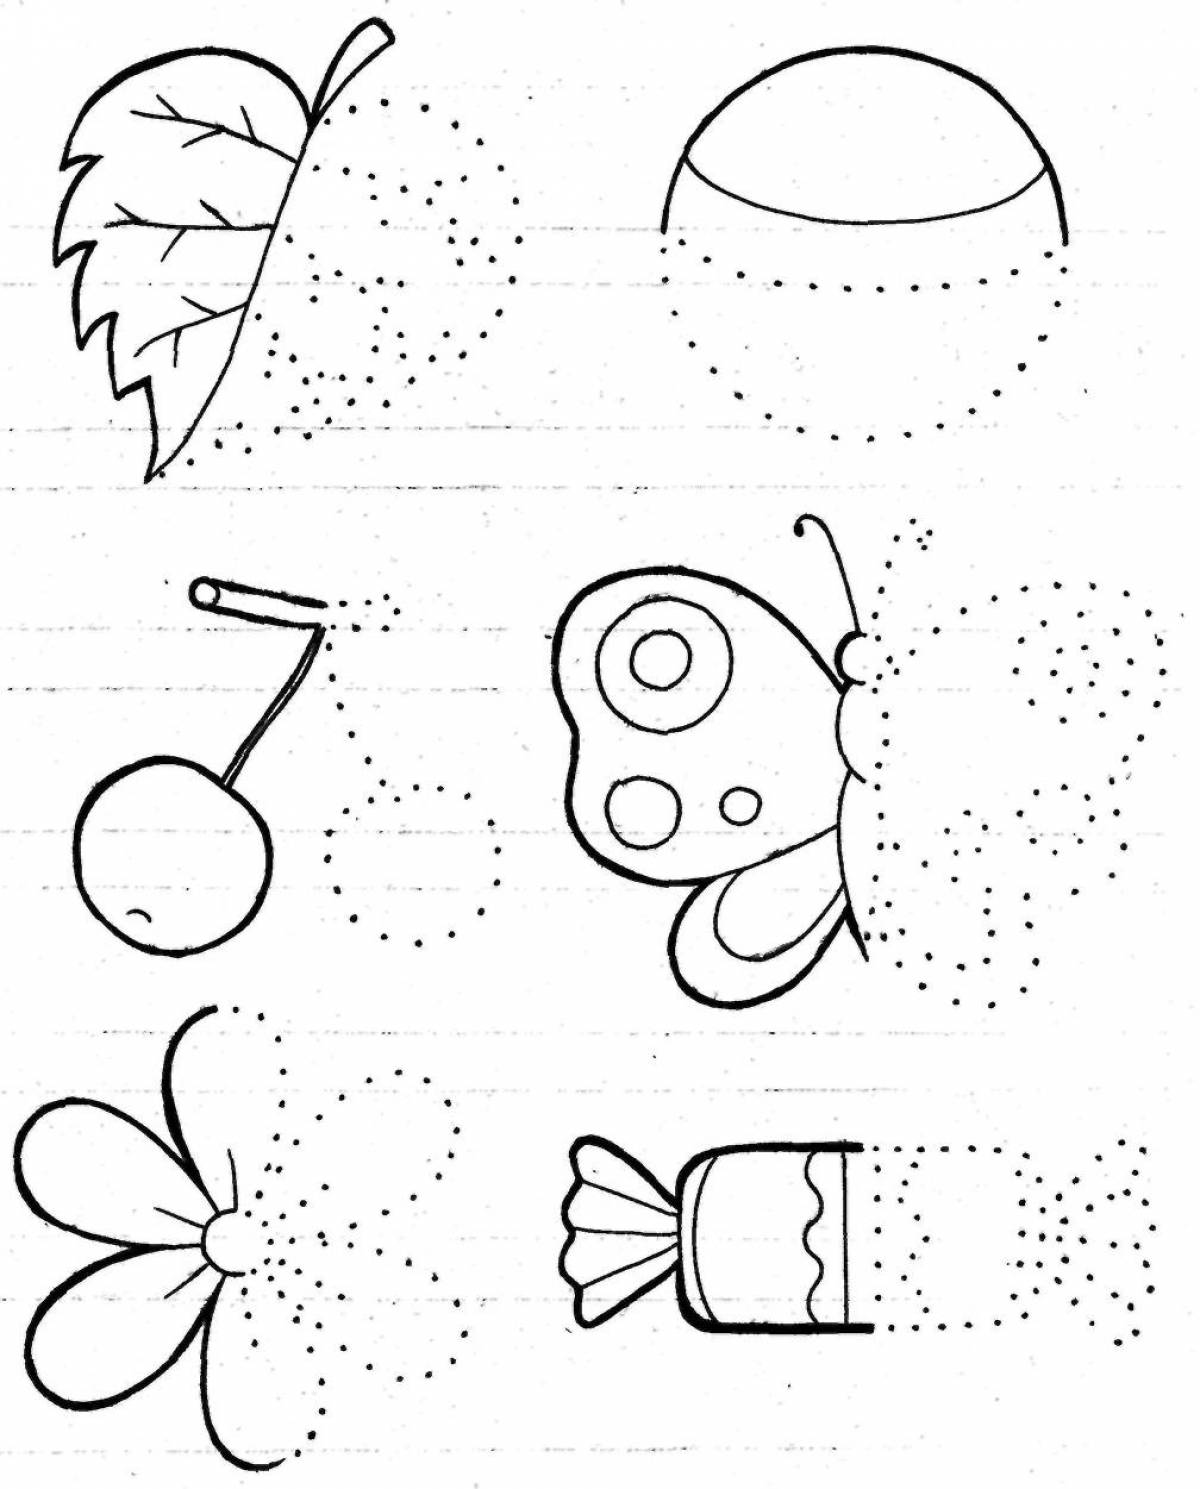 Fun coloring book design for younger students